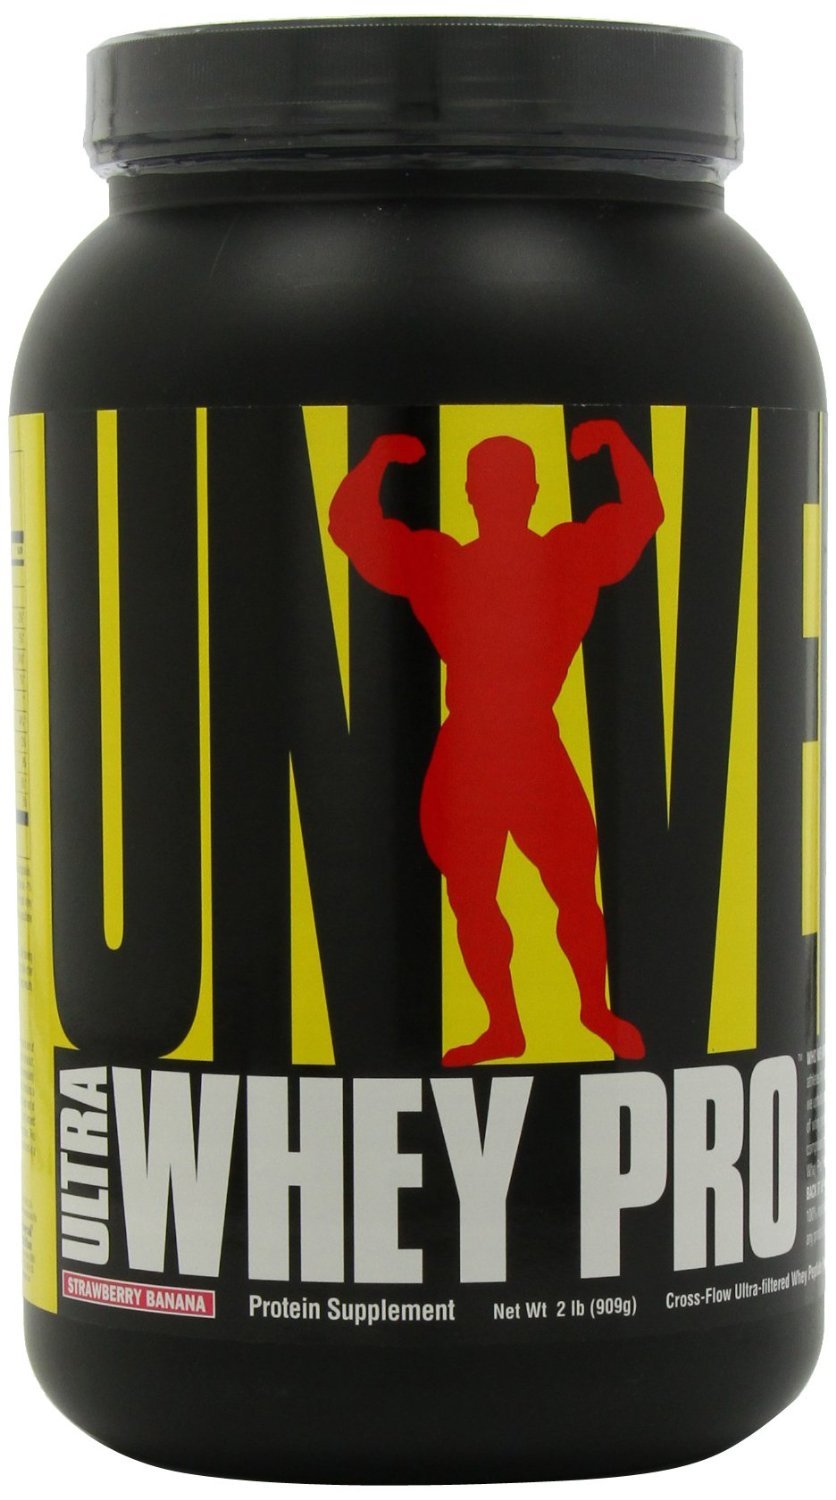 Ultra Whey Pro, 908 g, Universal Nutrition. Whey Protein Blend. 